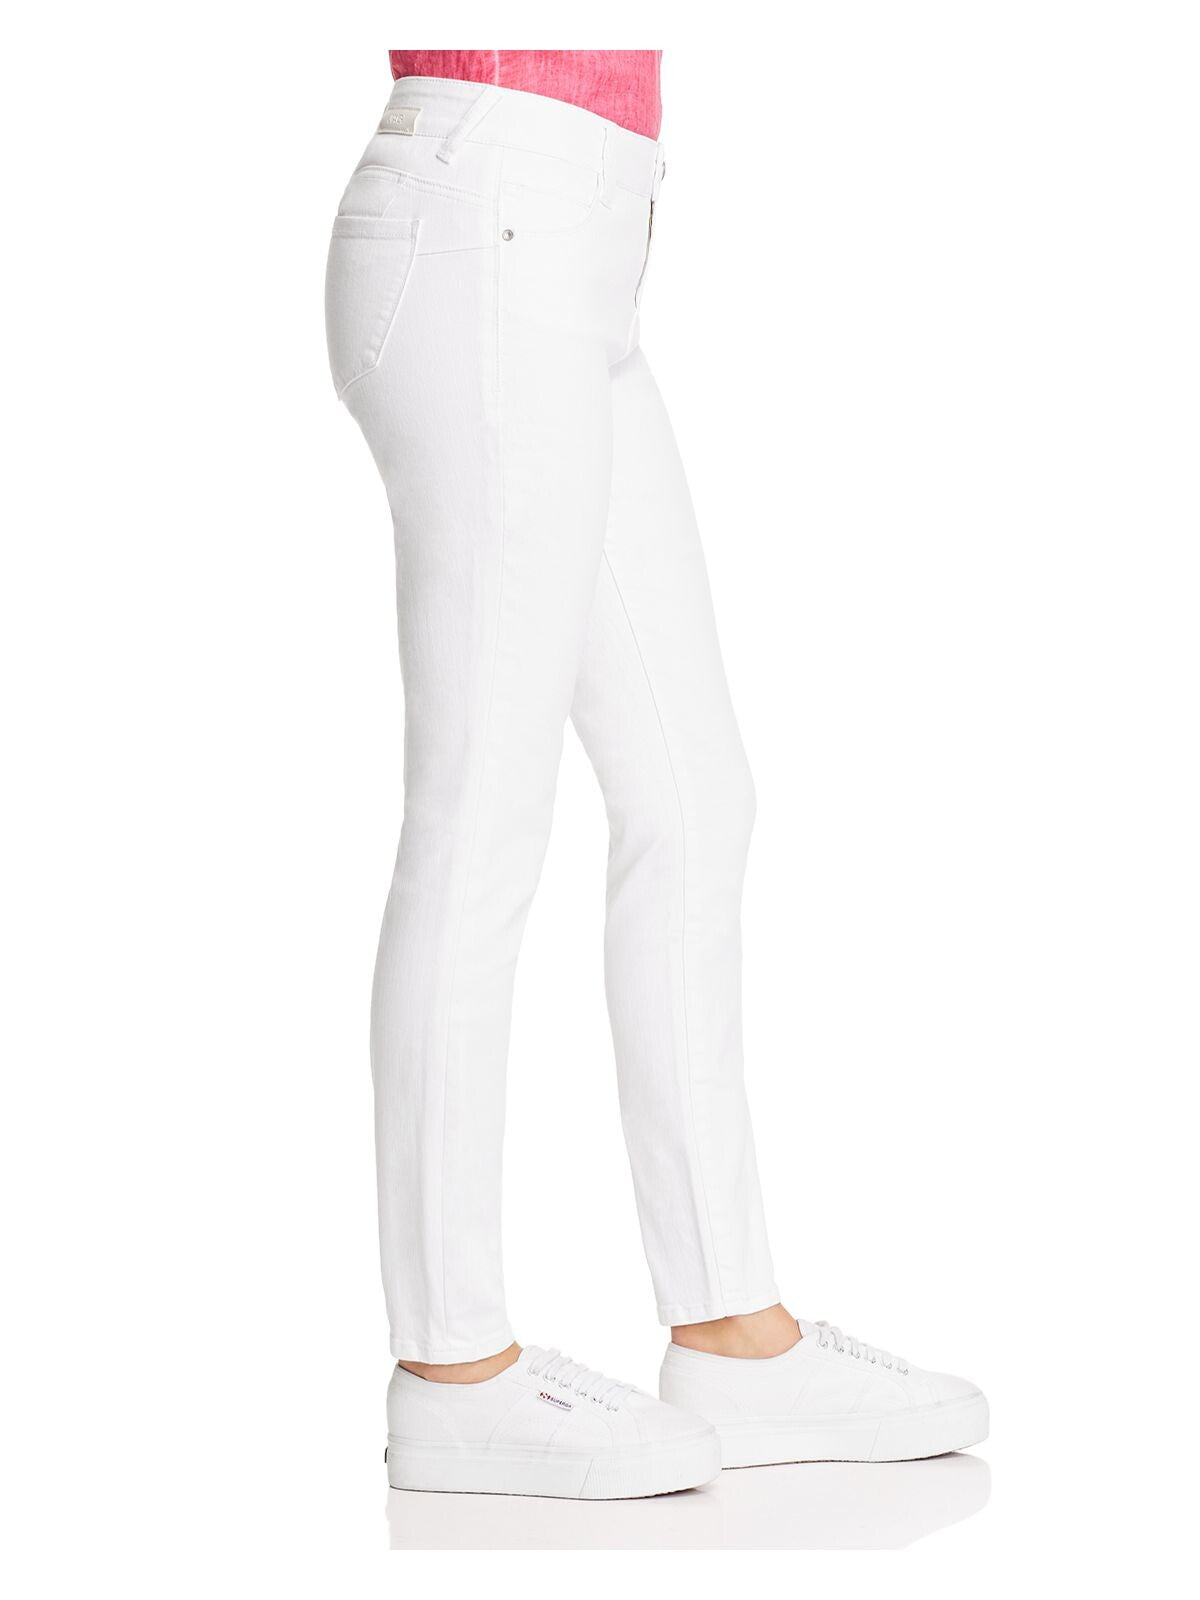 JAG Womens White Zippered Pocketed Mid Rise Skinny Jeans Juniors 0/25